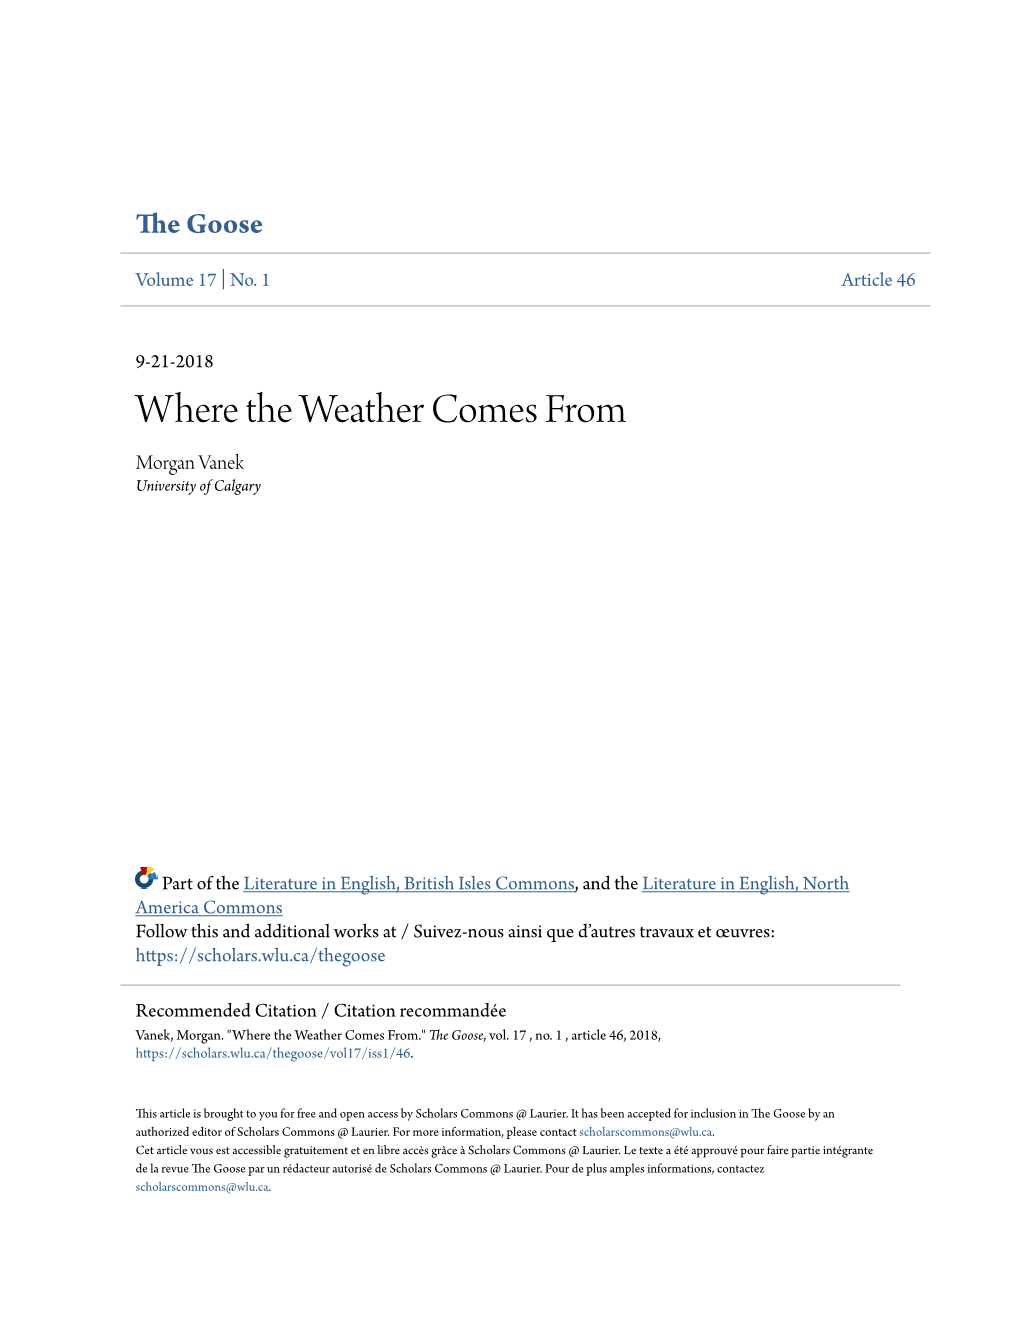 Where the Weather Comes from Morgan Vanek University of Calgary